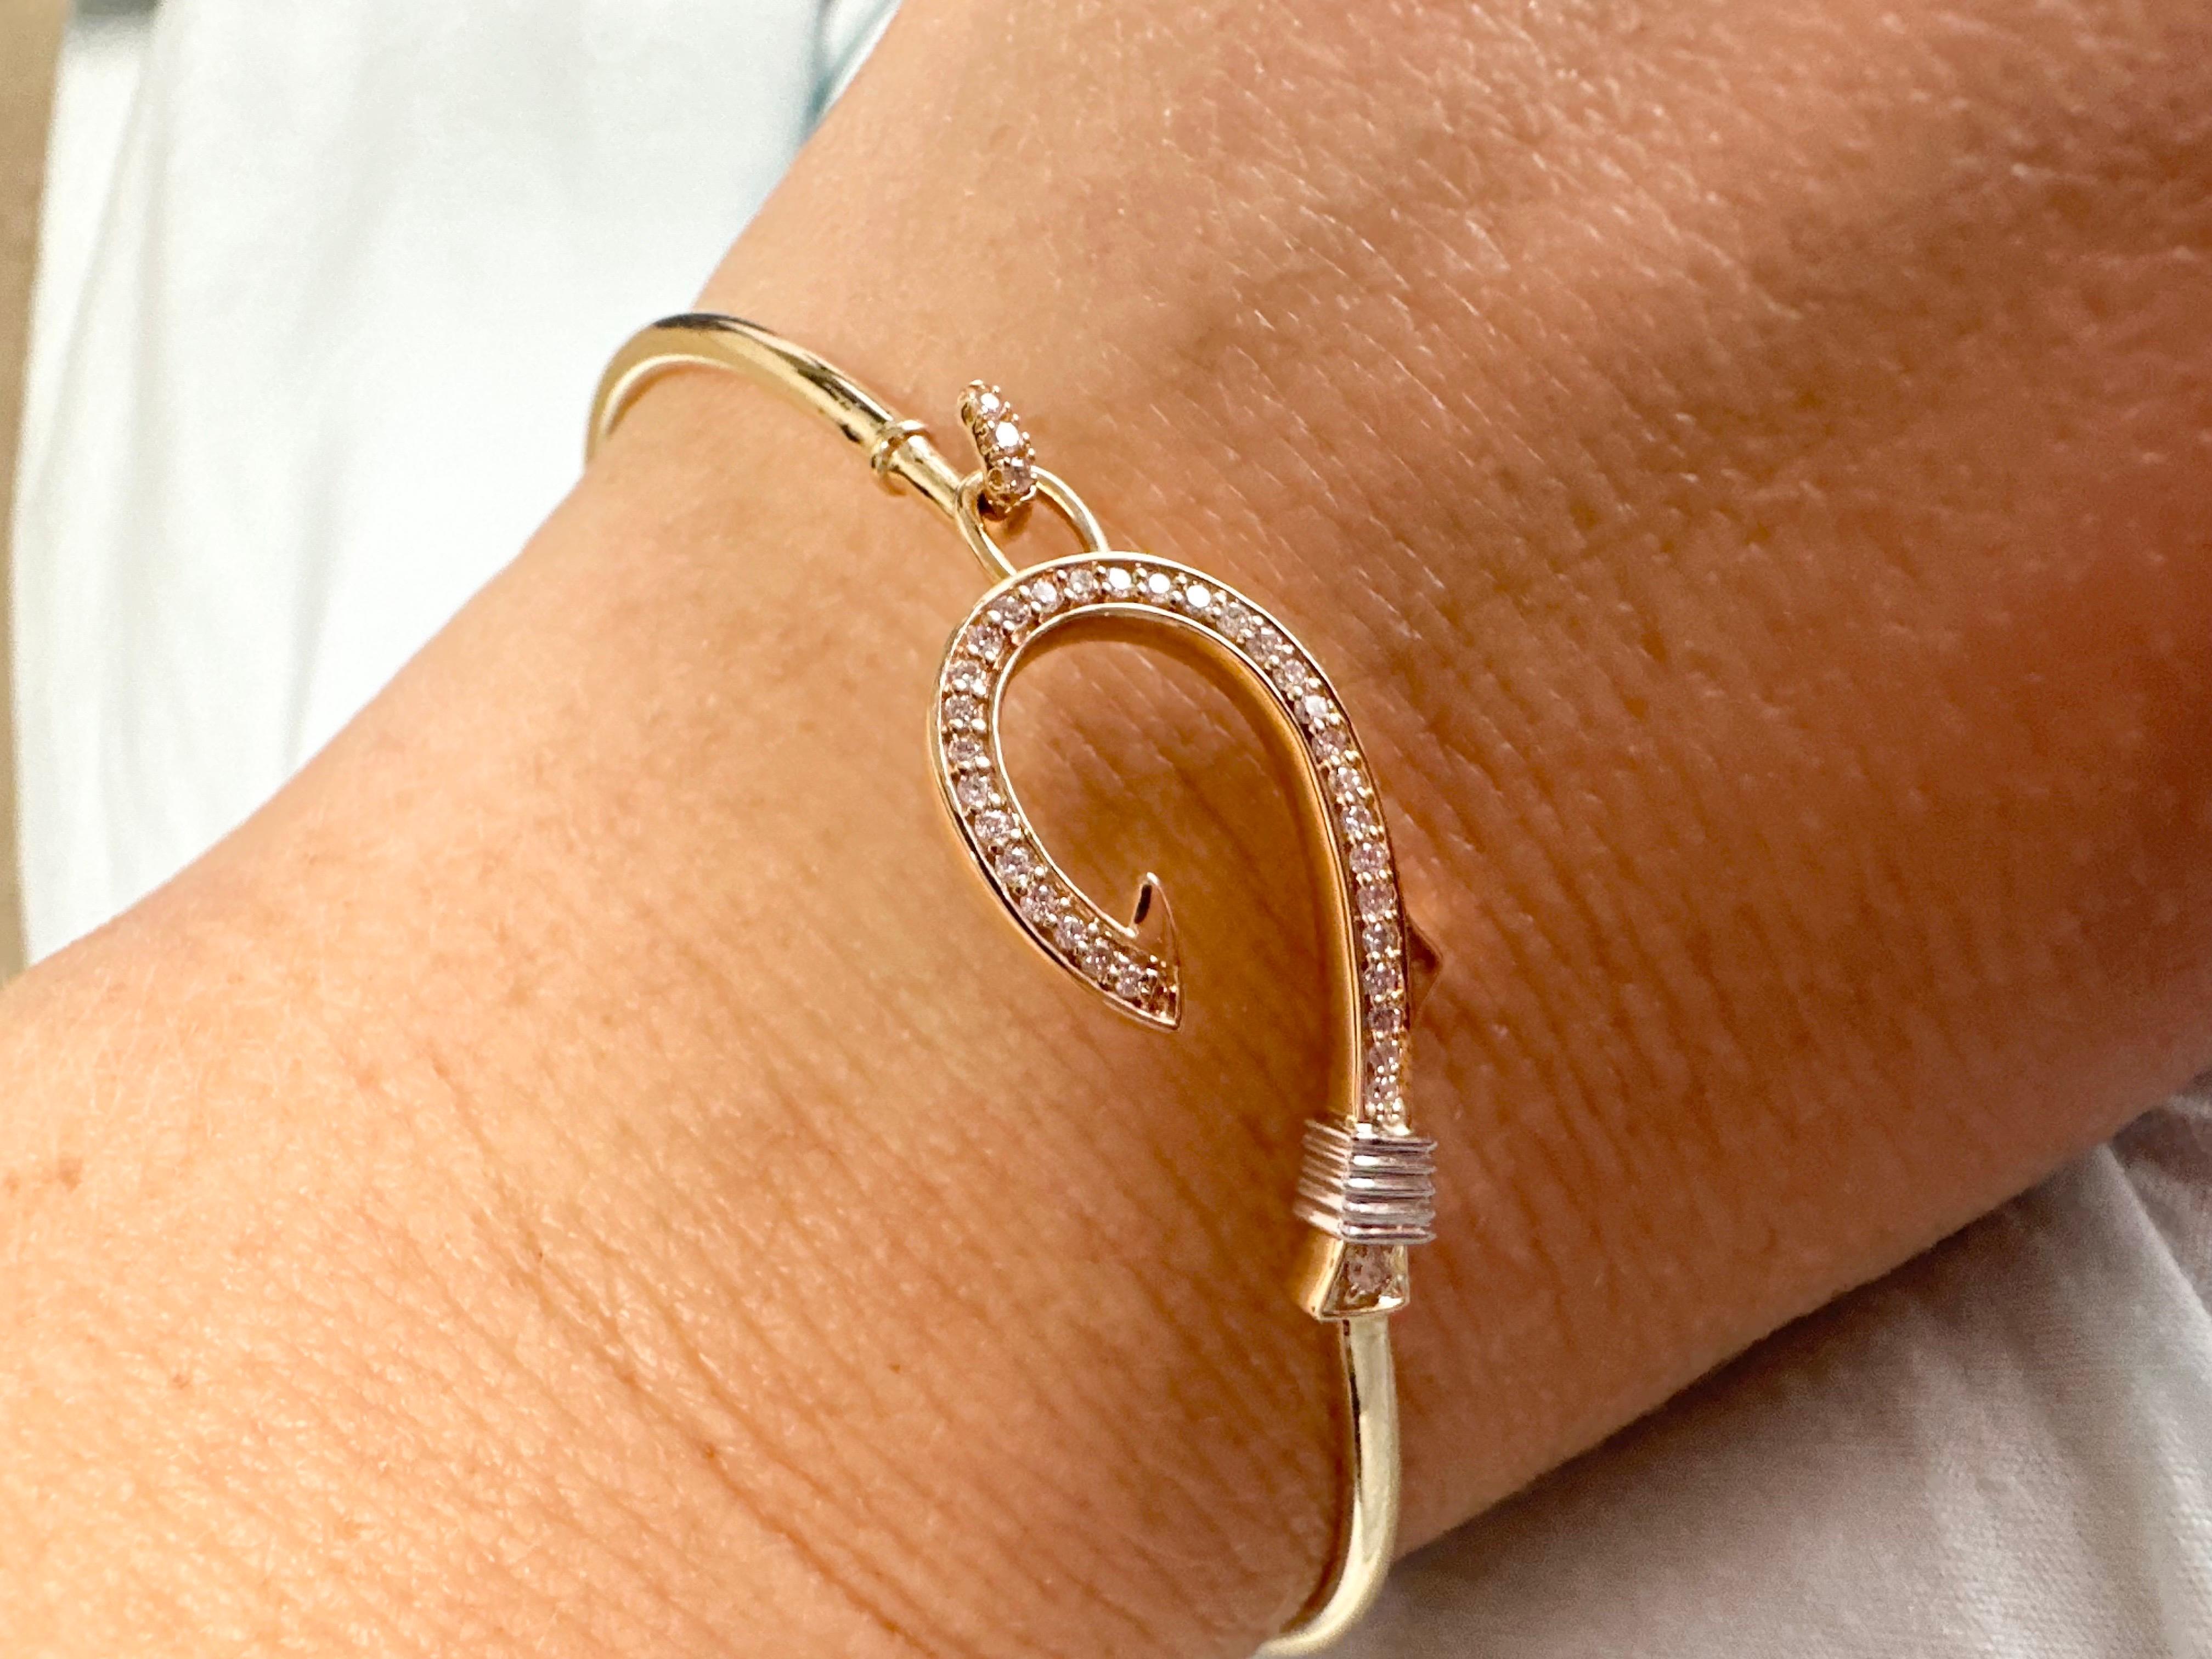 Fishhook bracelet with 0.18 carats of diamonds in 14KT gold, the bangle bracelet is flexible, comfortable and stunning when on your wrist! Certificate of authenticity comes with the purchase!

METAL: 14kt
NATURAL DIAMOND(S)
Clarity/Color: